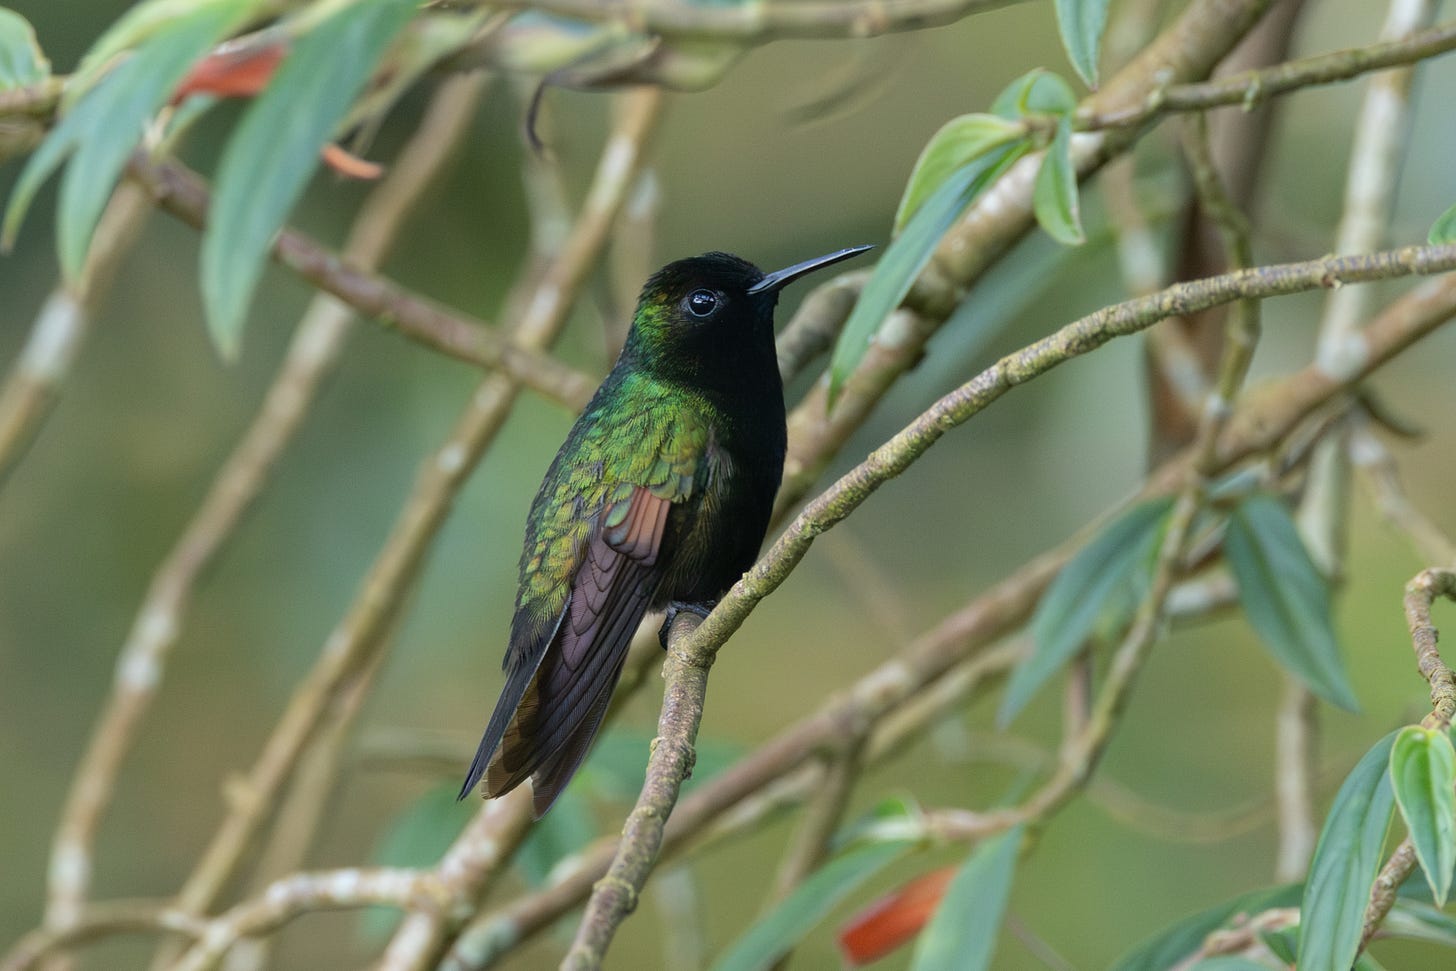 a green hummingbird with an entirely black front, perched on a stick.